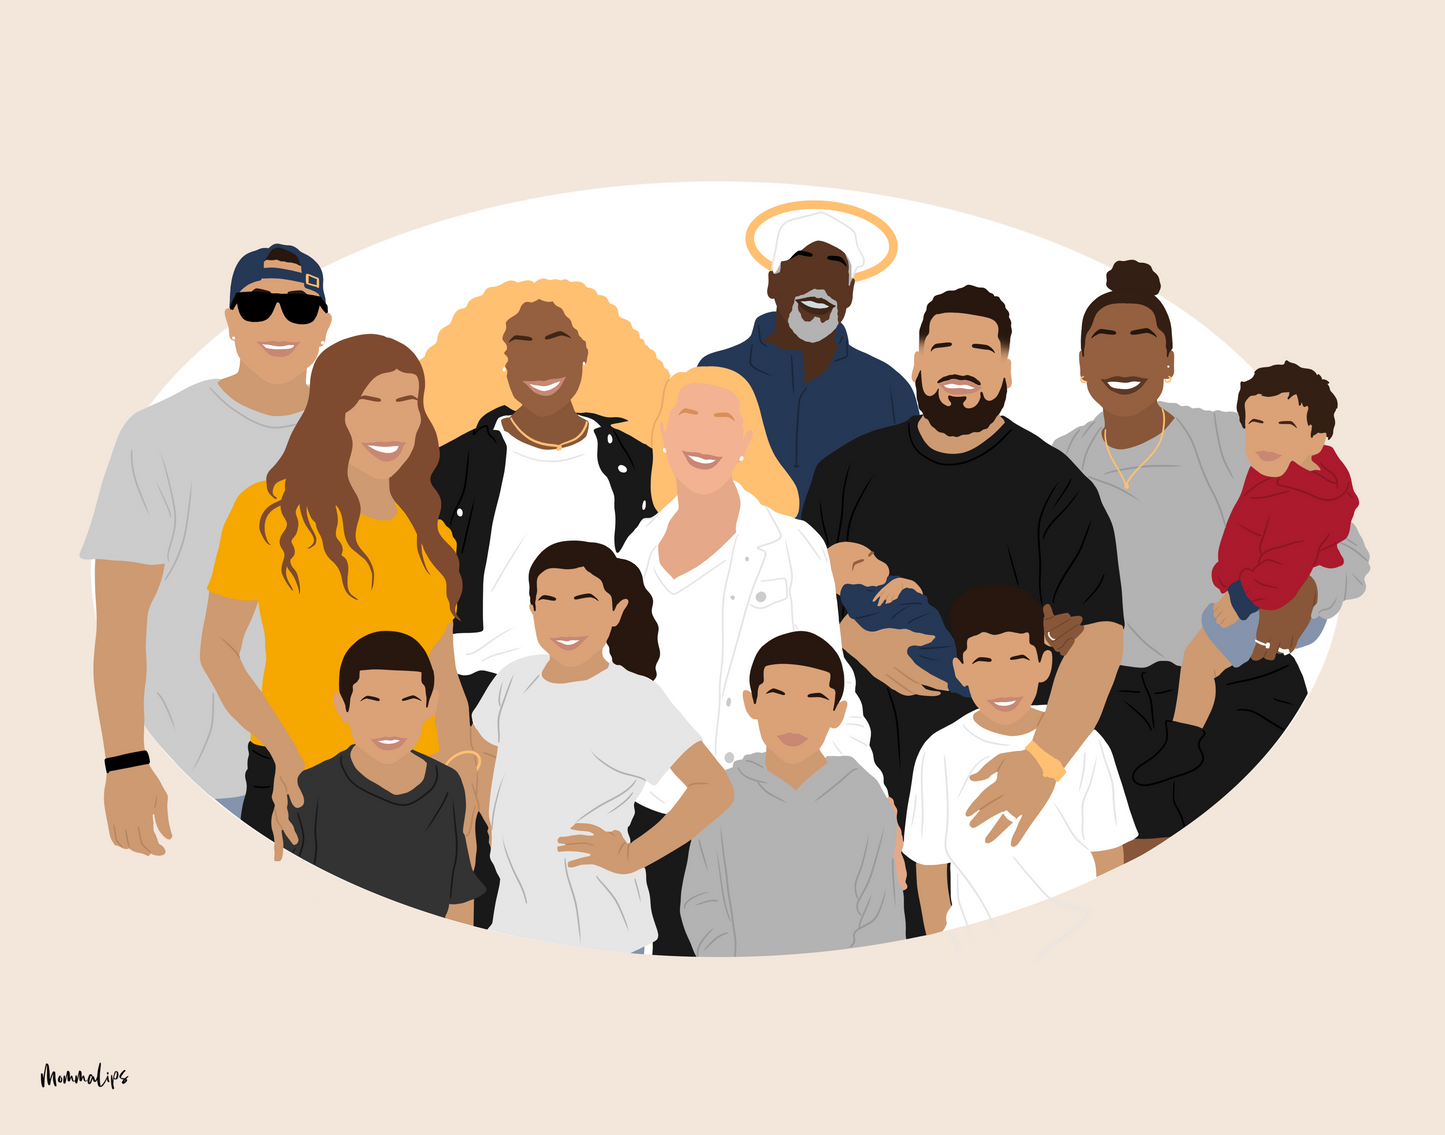 Memorial illustration of large family. Added individual in the back with halo.